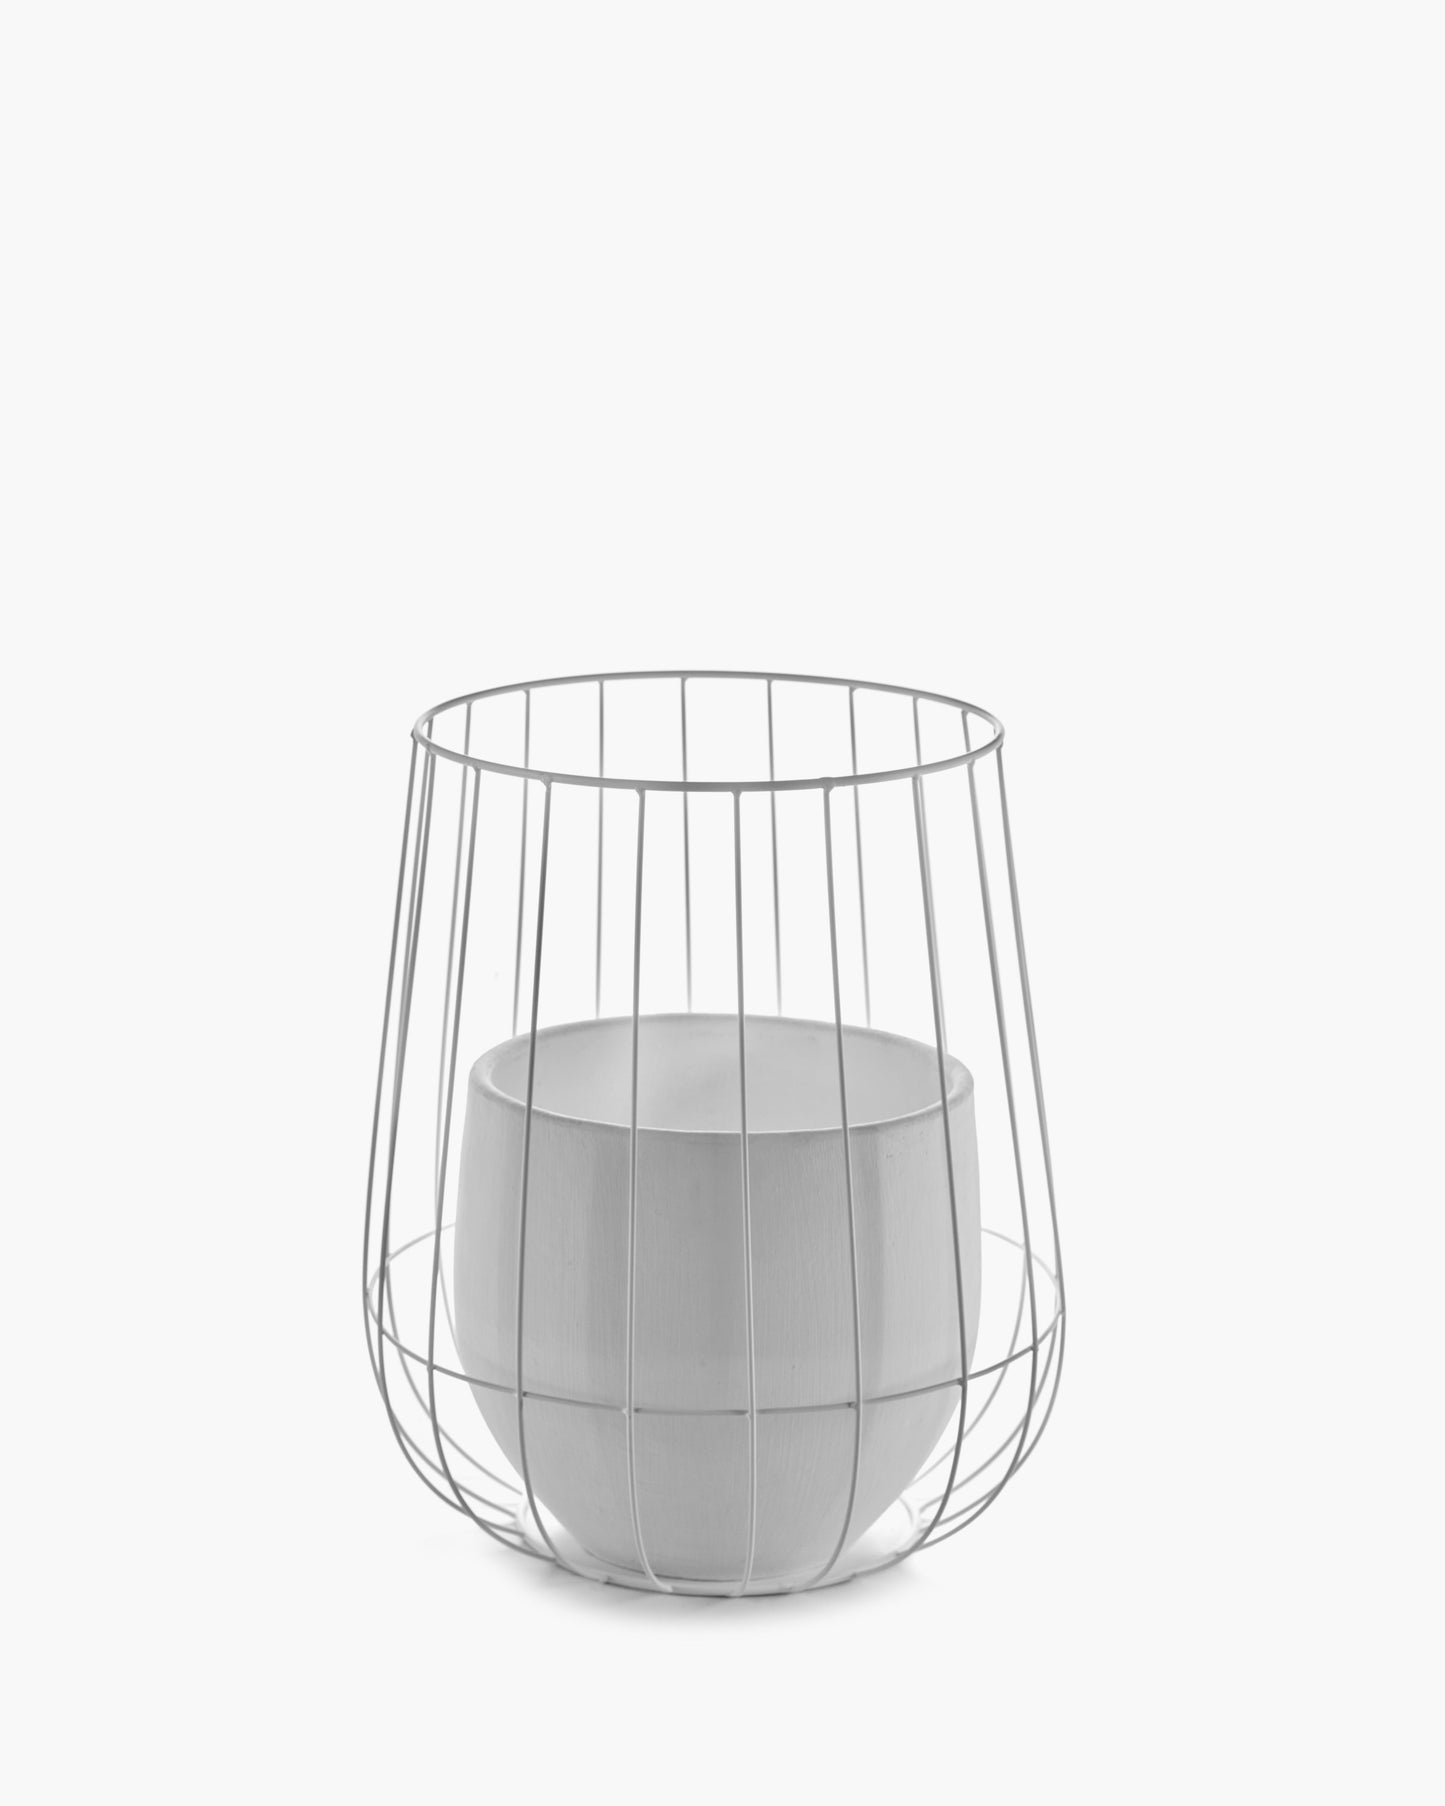 Pot in a cage white